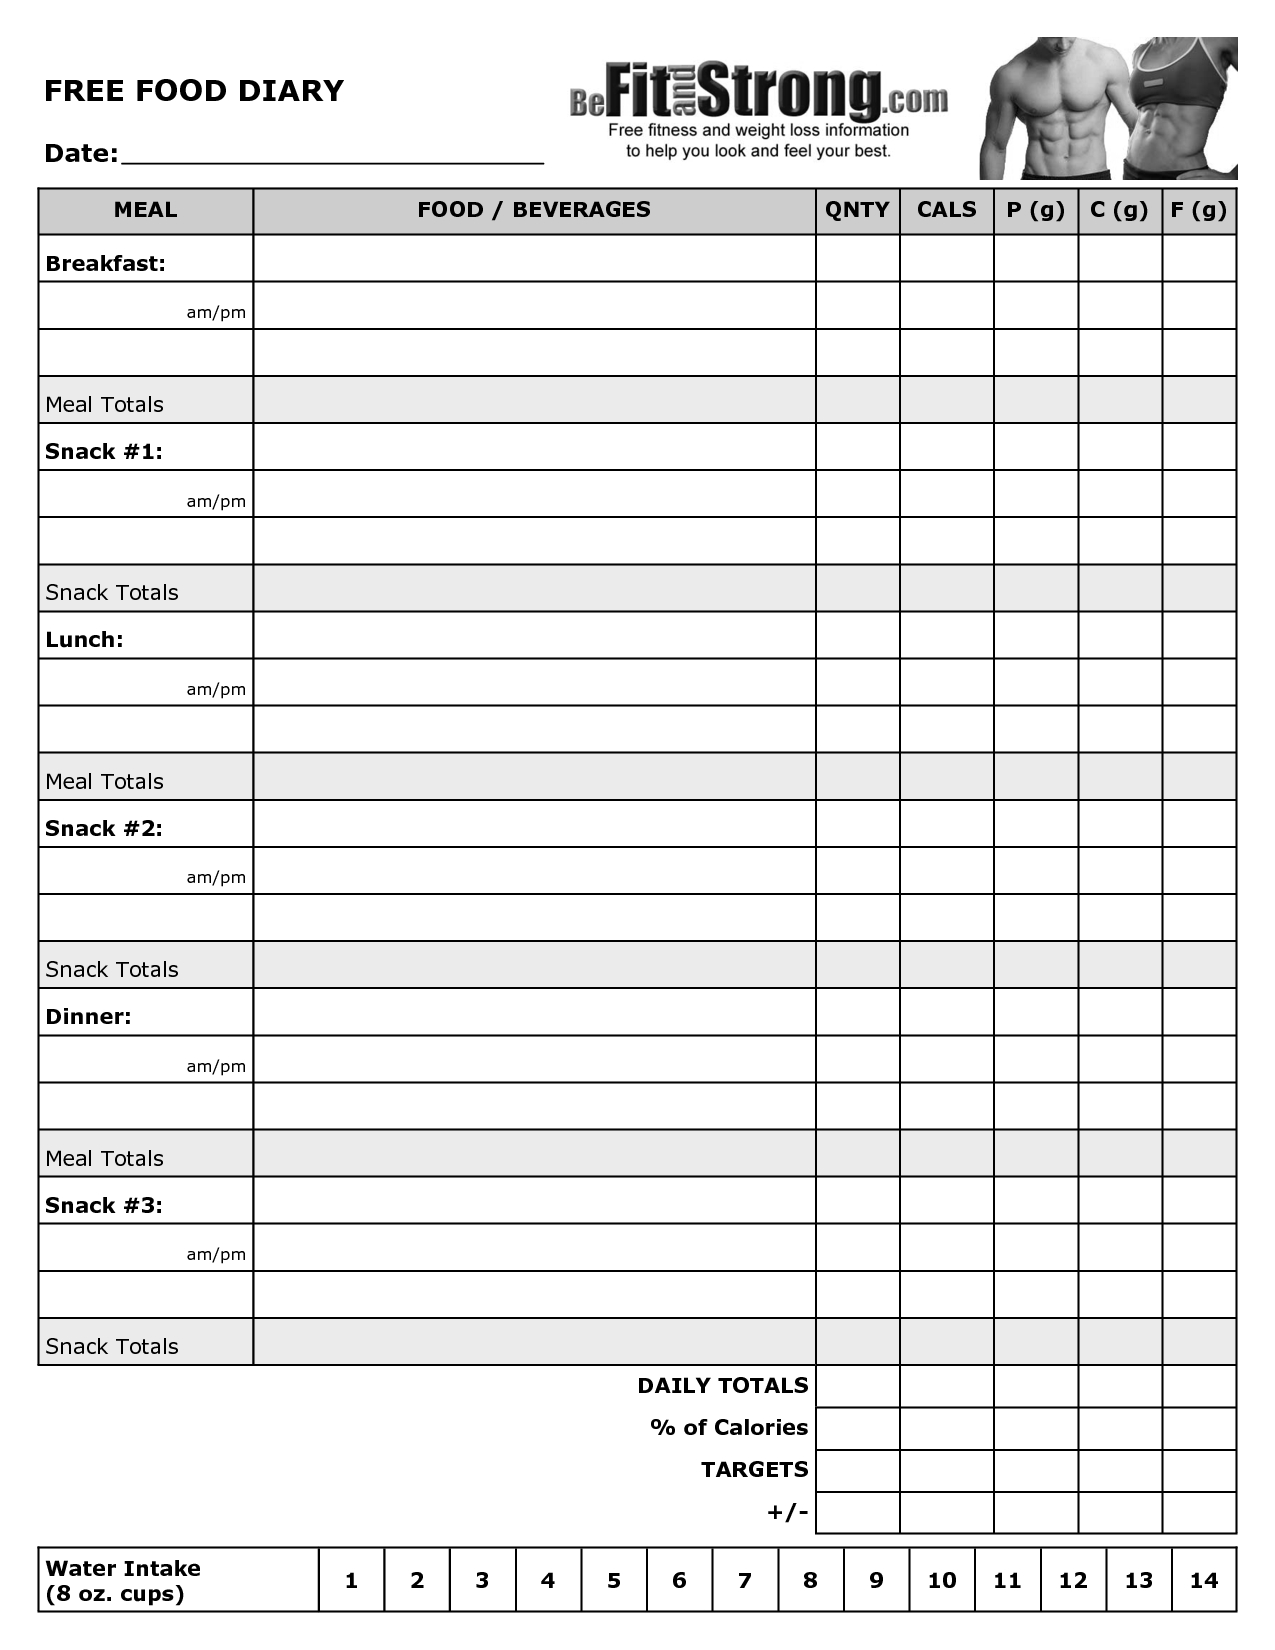 Free Printable Food Diary Template | Health, Fitness &amp;amp; Weight Loss - Free Printable Calorie Chart